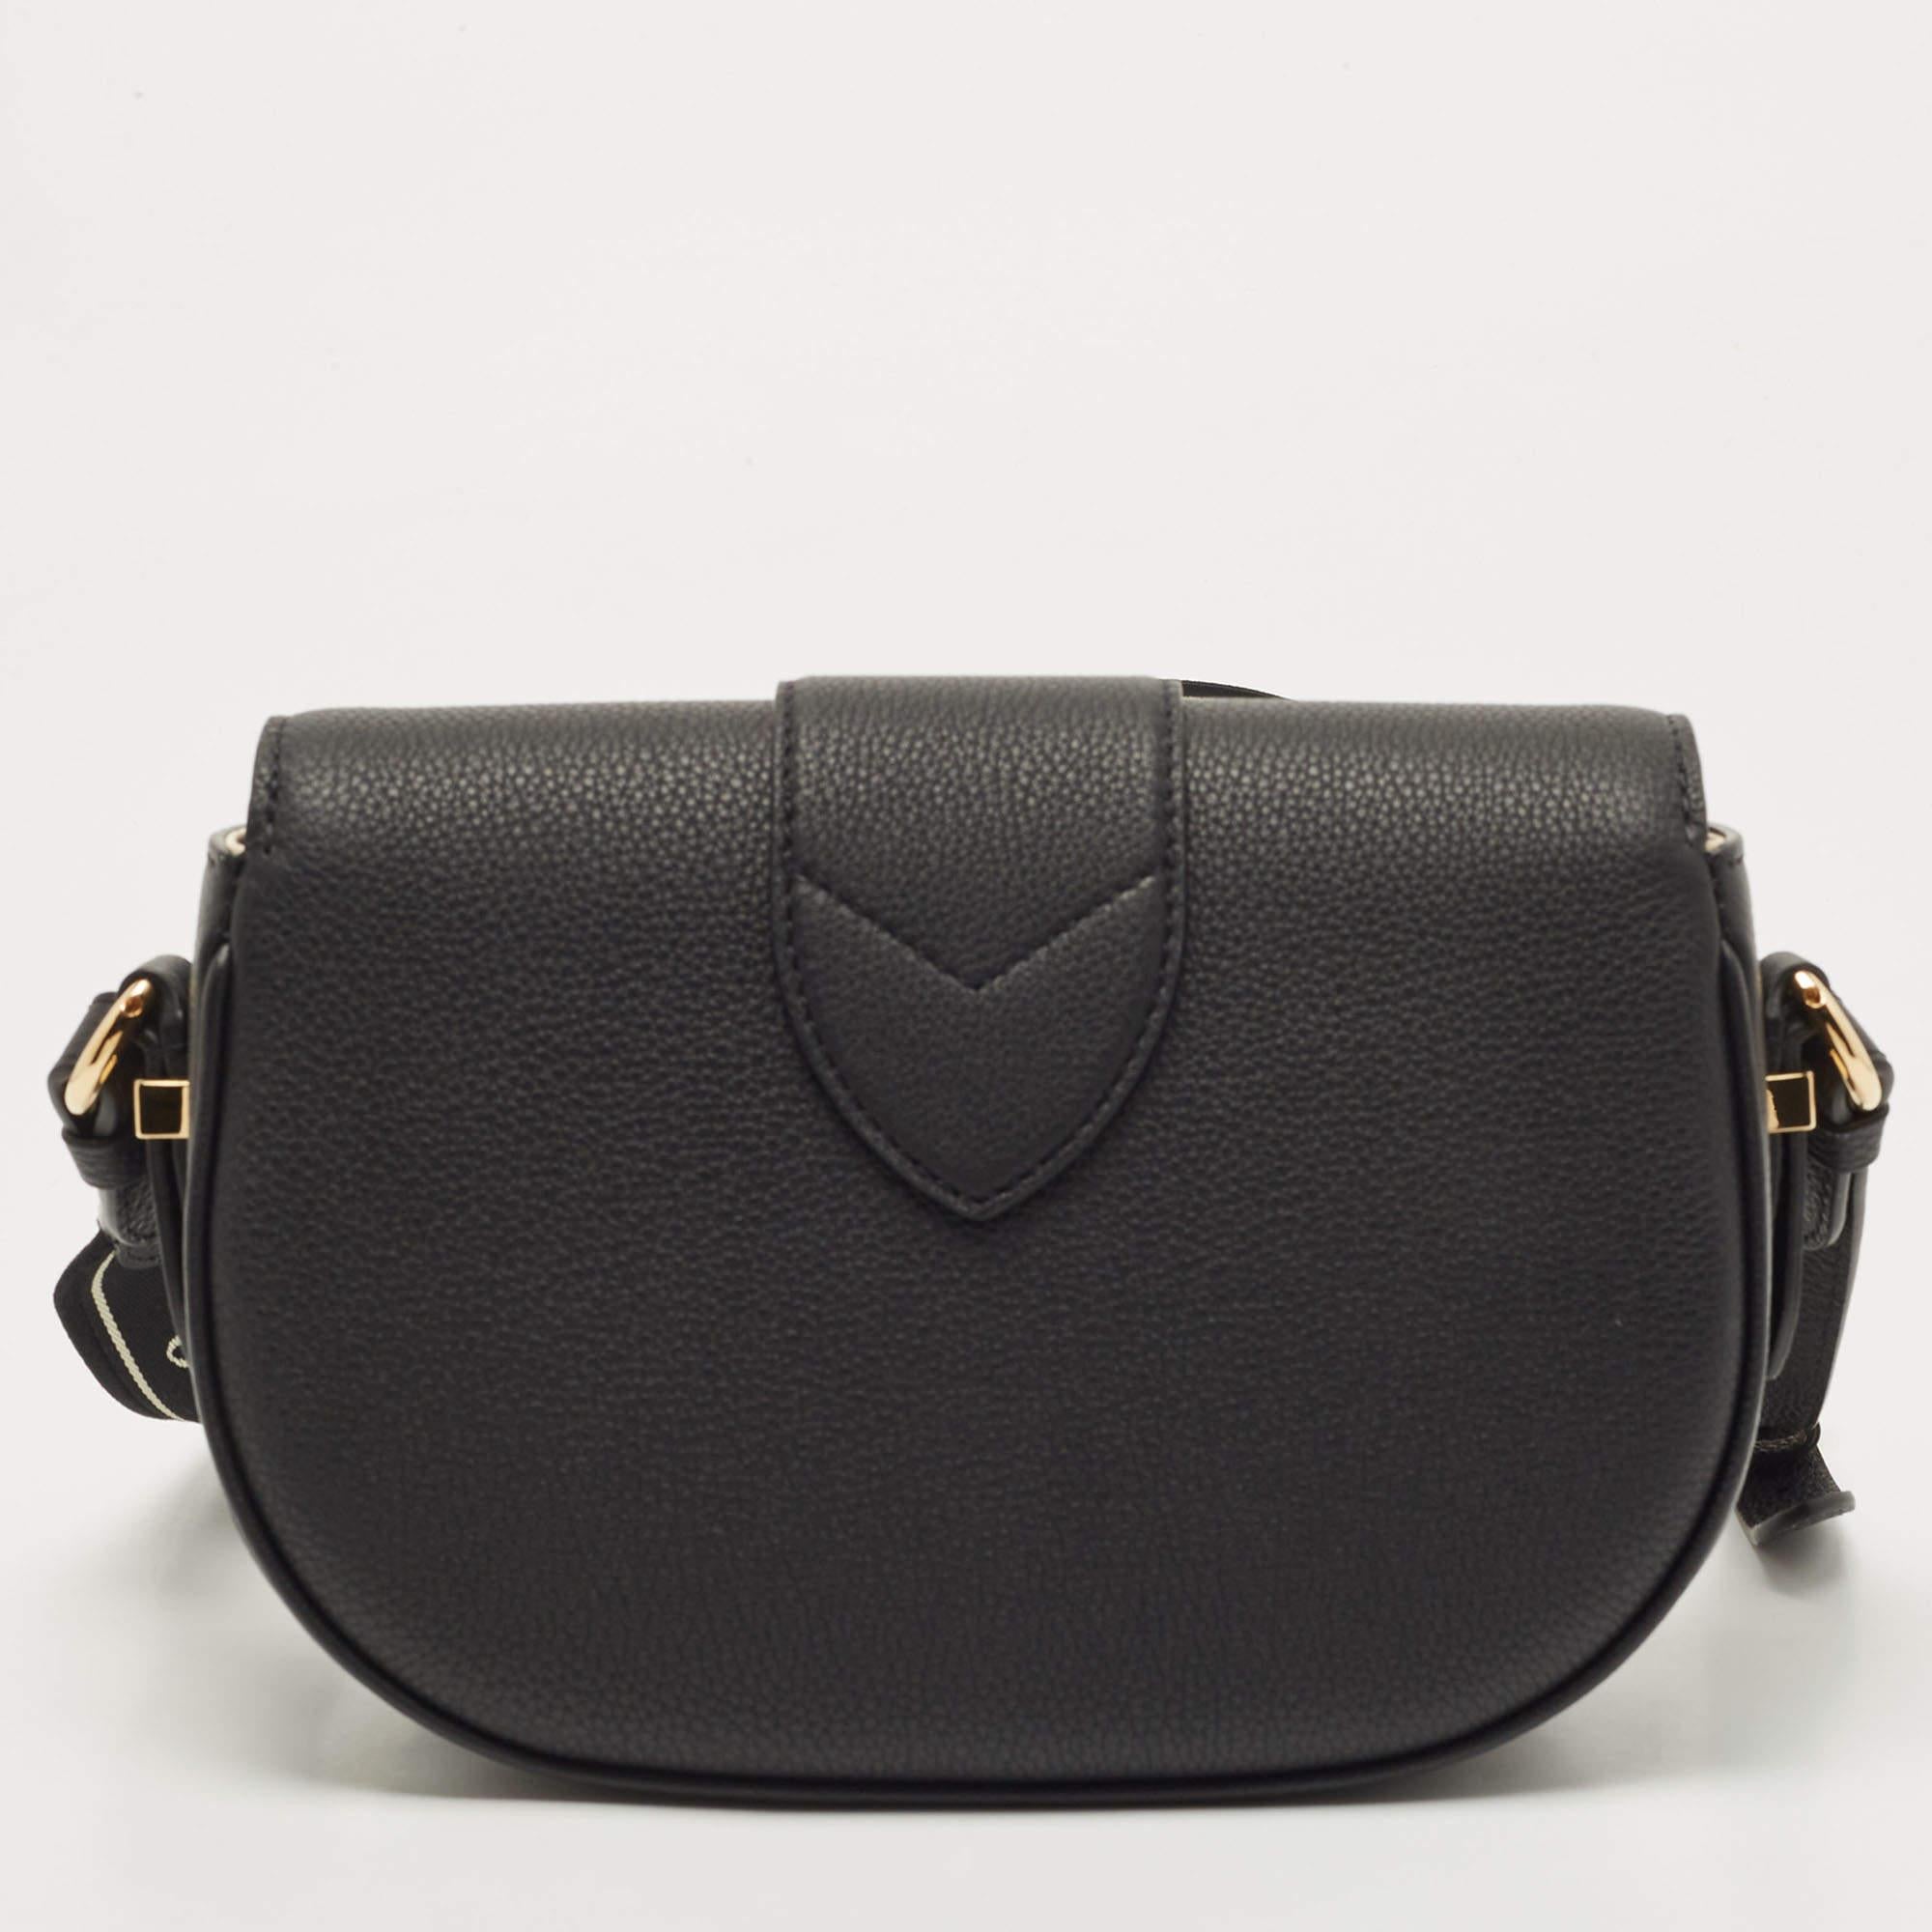 The Louis Vuitton Pont 9 soft bag is an exquisite luxury accessory crafted with high-quality black leather. Its sleek and timeless design features a spacious main compartment, complemented by gold-tone hardware and an adjustable shoulder strap. The